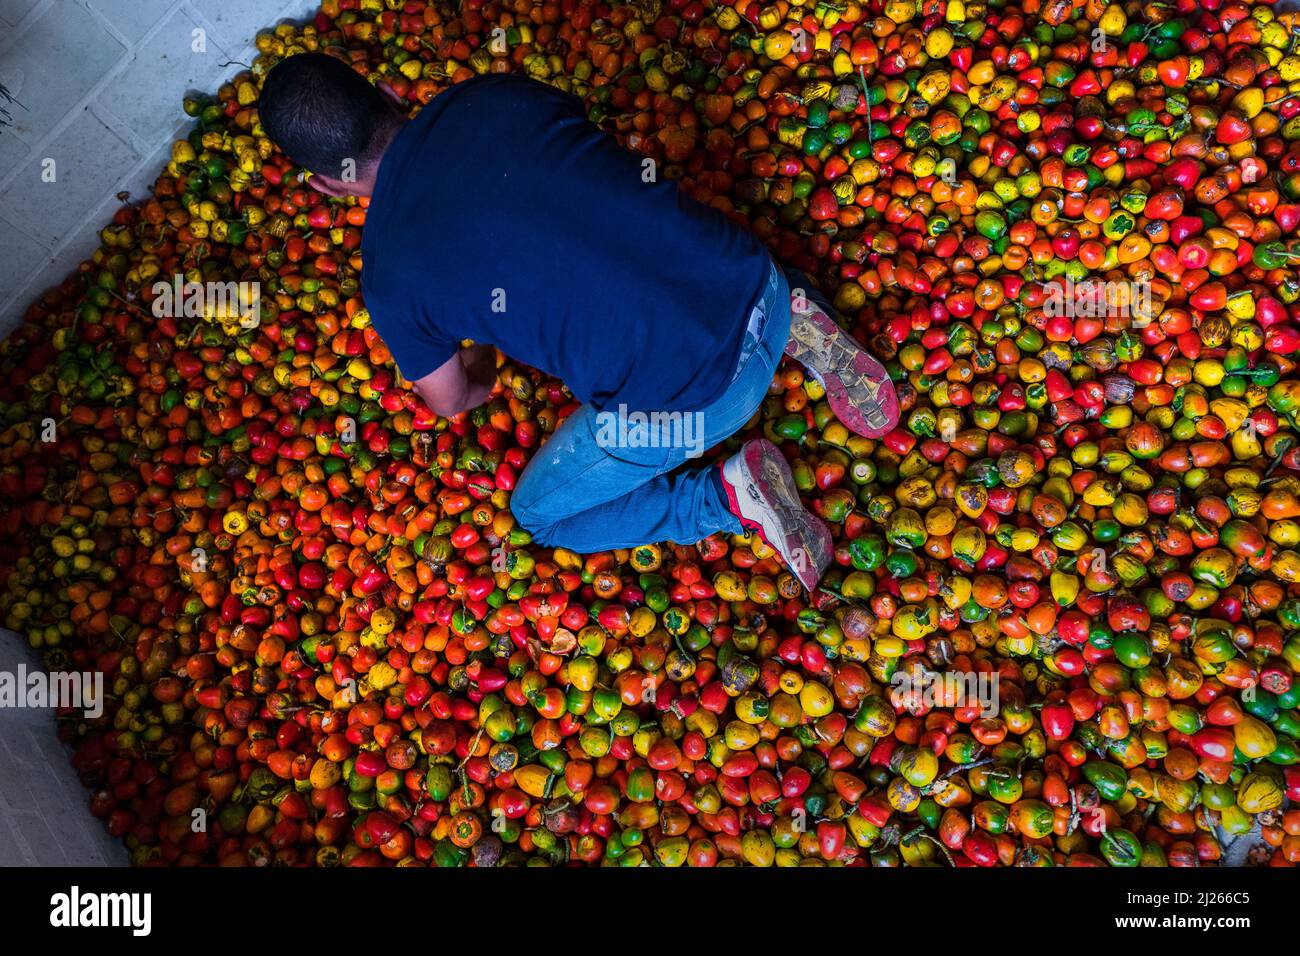 A Colombian man spreads raw chontaduro (peach palm) fruits on the floor in a processing facility in Cali, Valle del Cauca, Colombia. Stock Photo